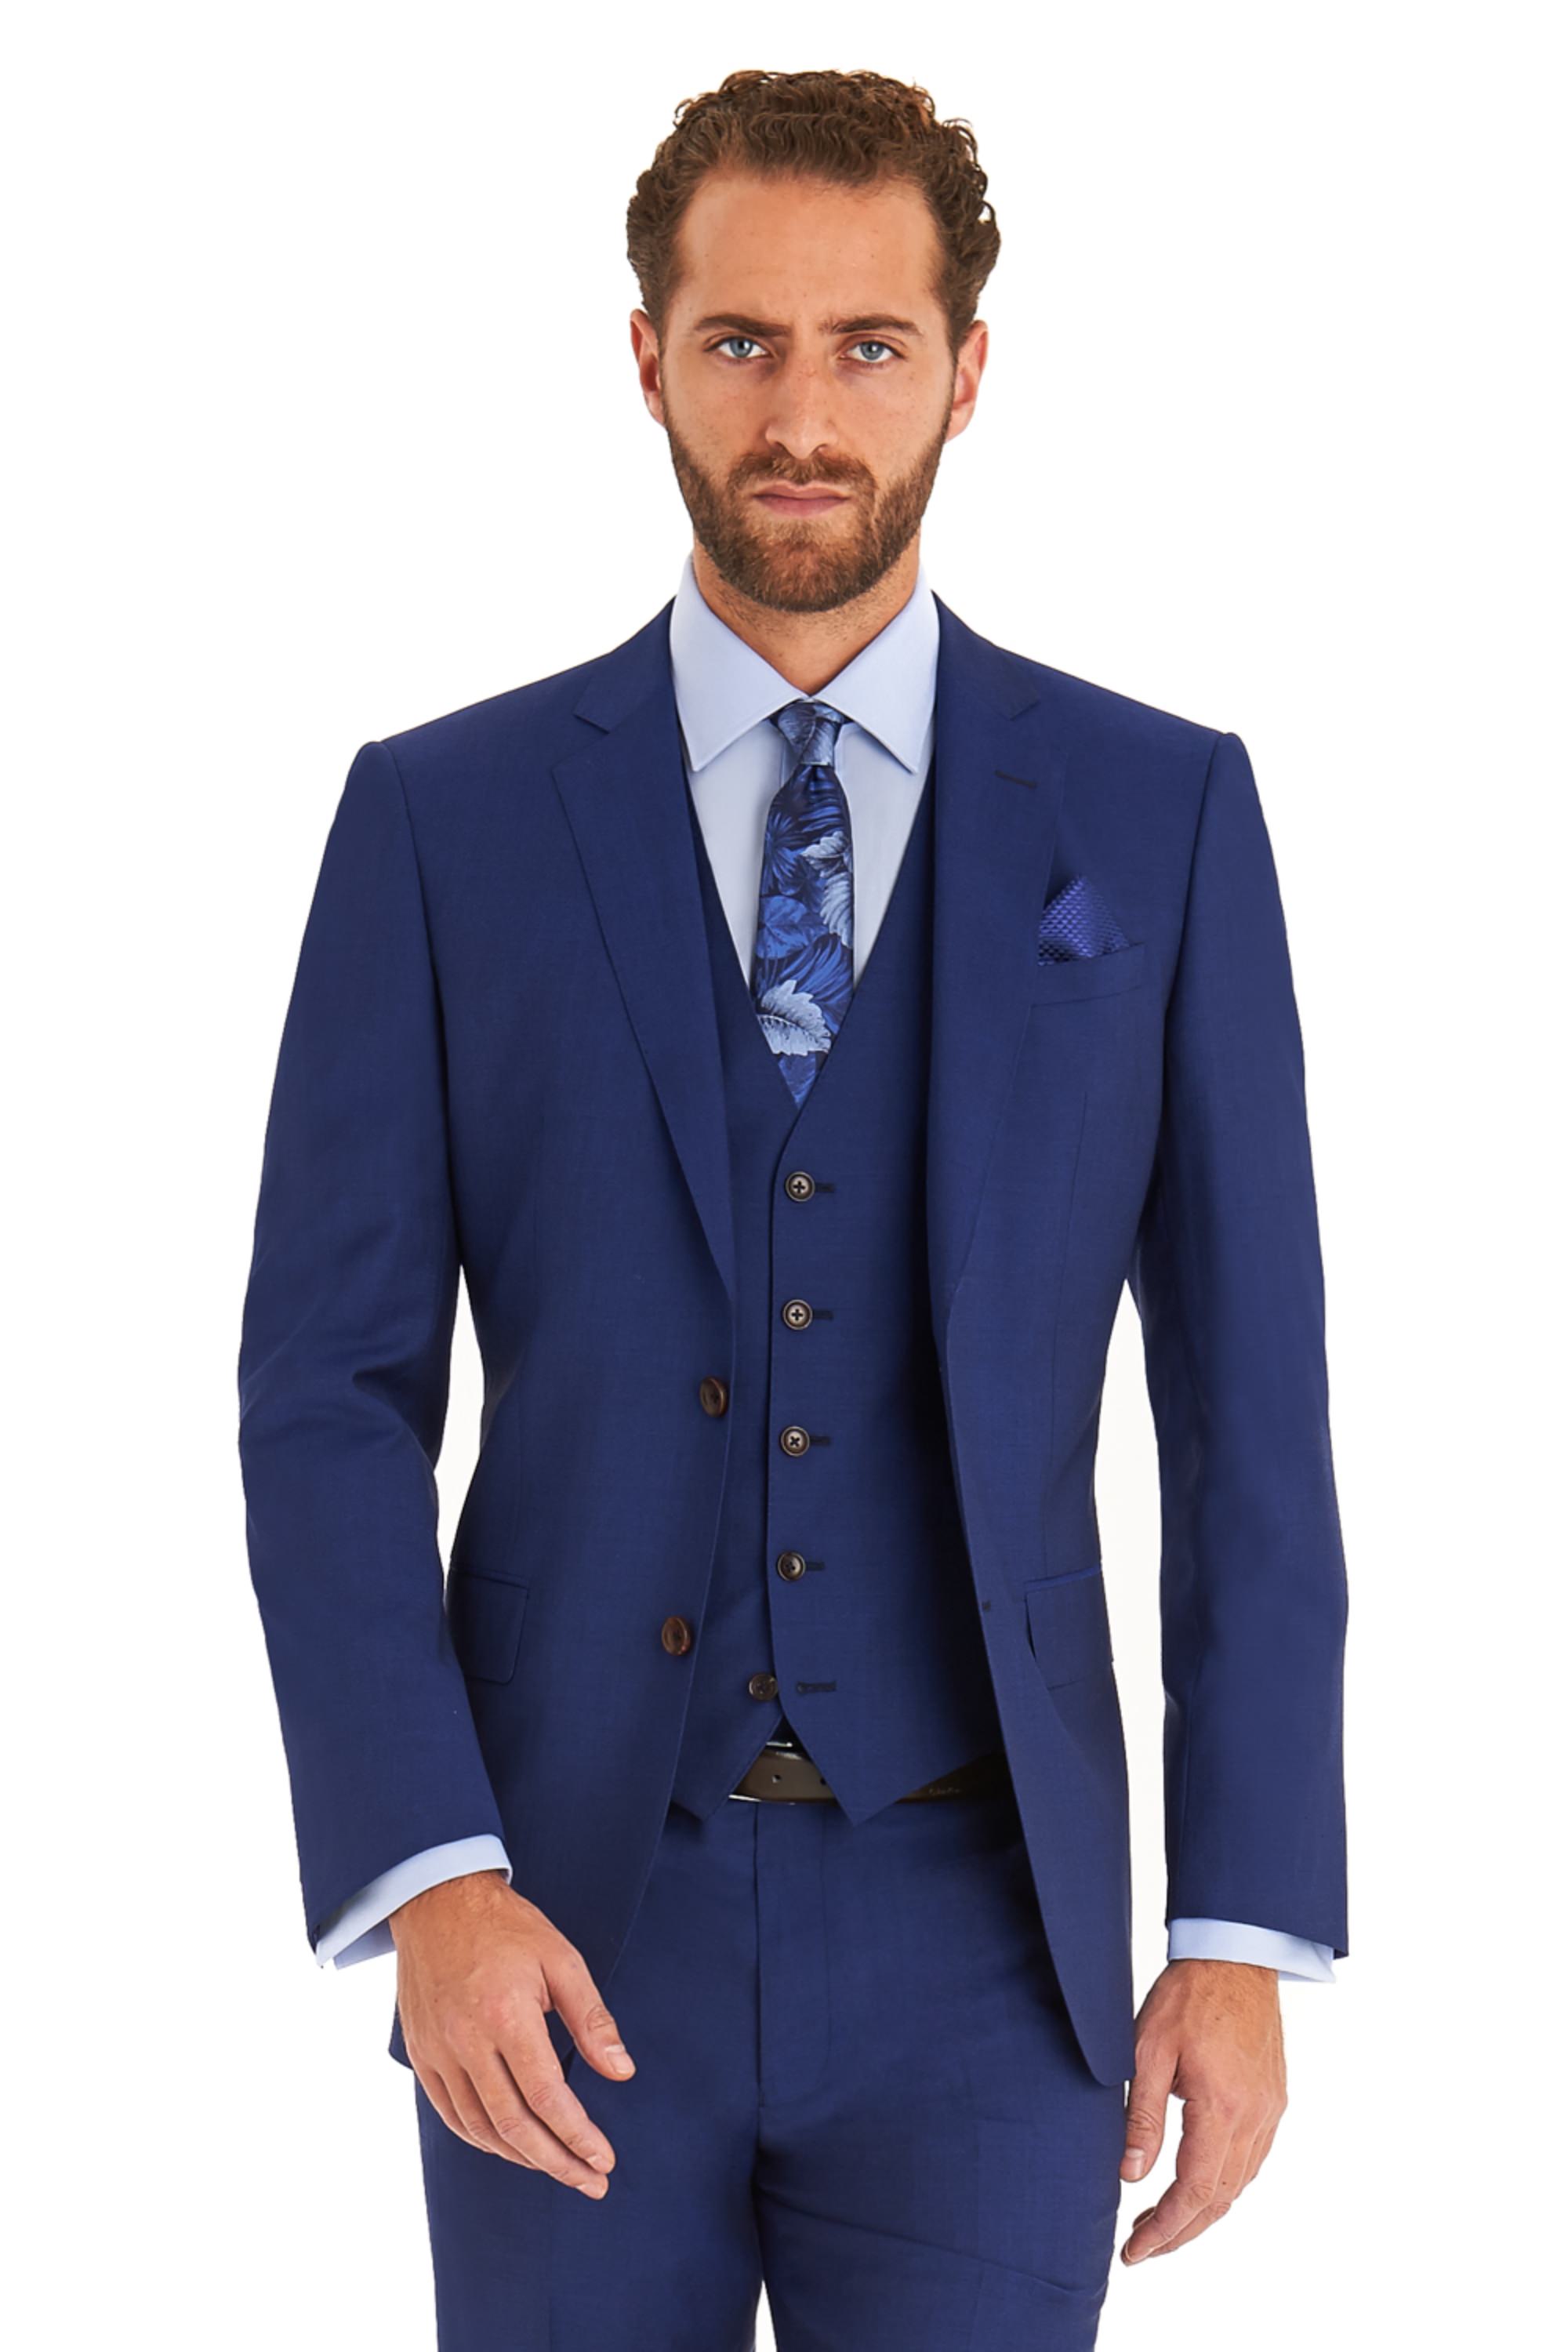 Moss 1851 Tailored Fit Bright Blue 3 Piece Suit | Buy Online at Moss